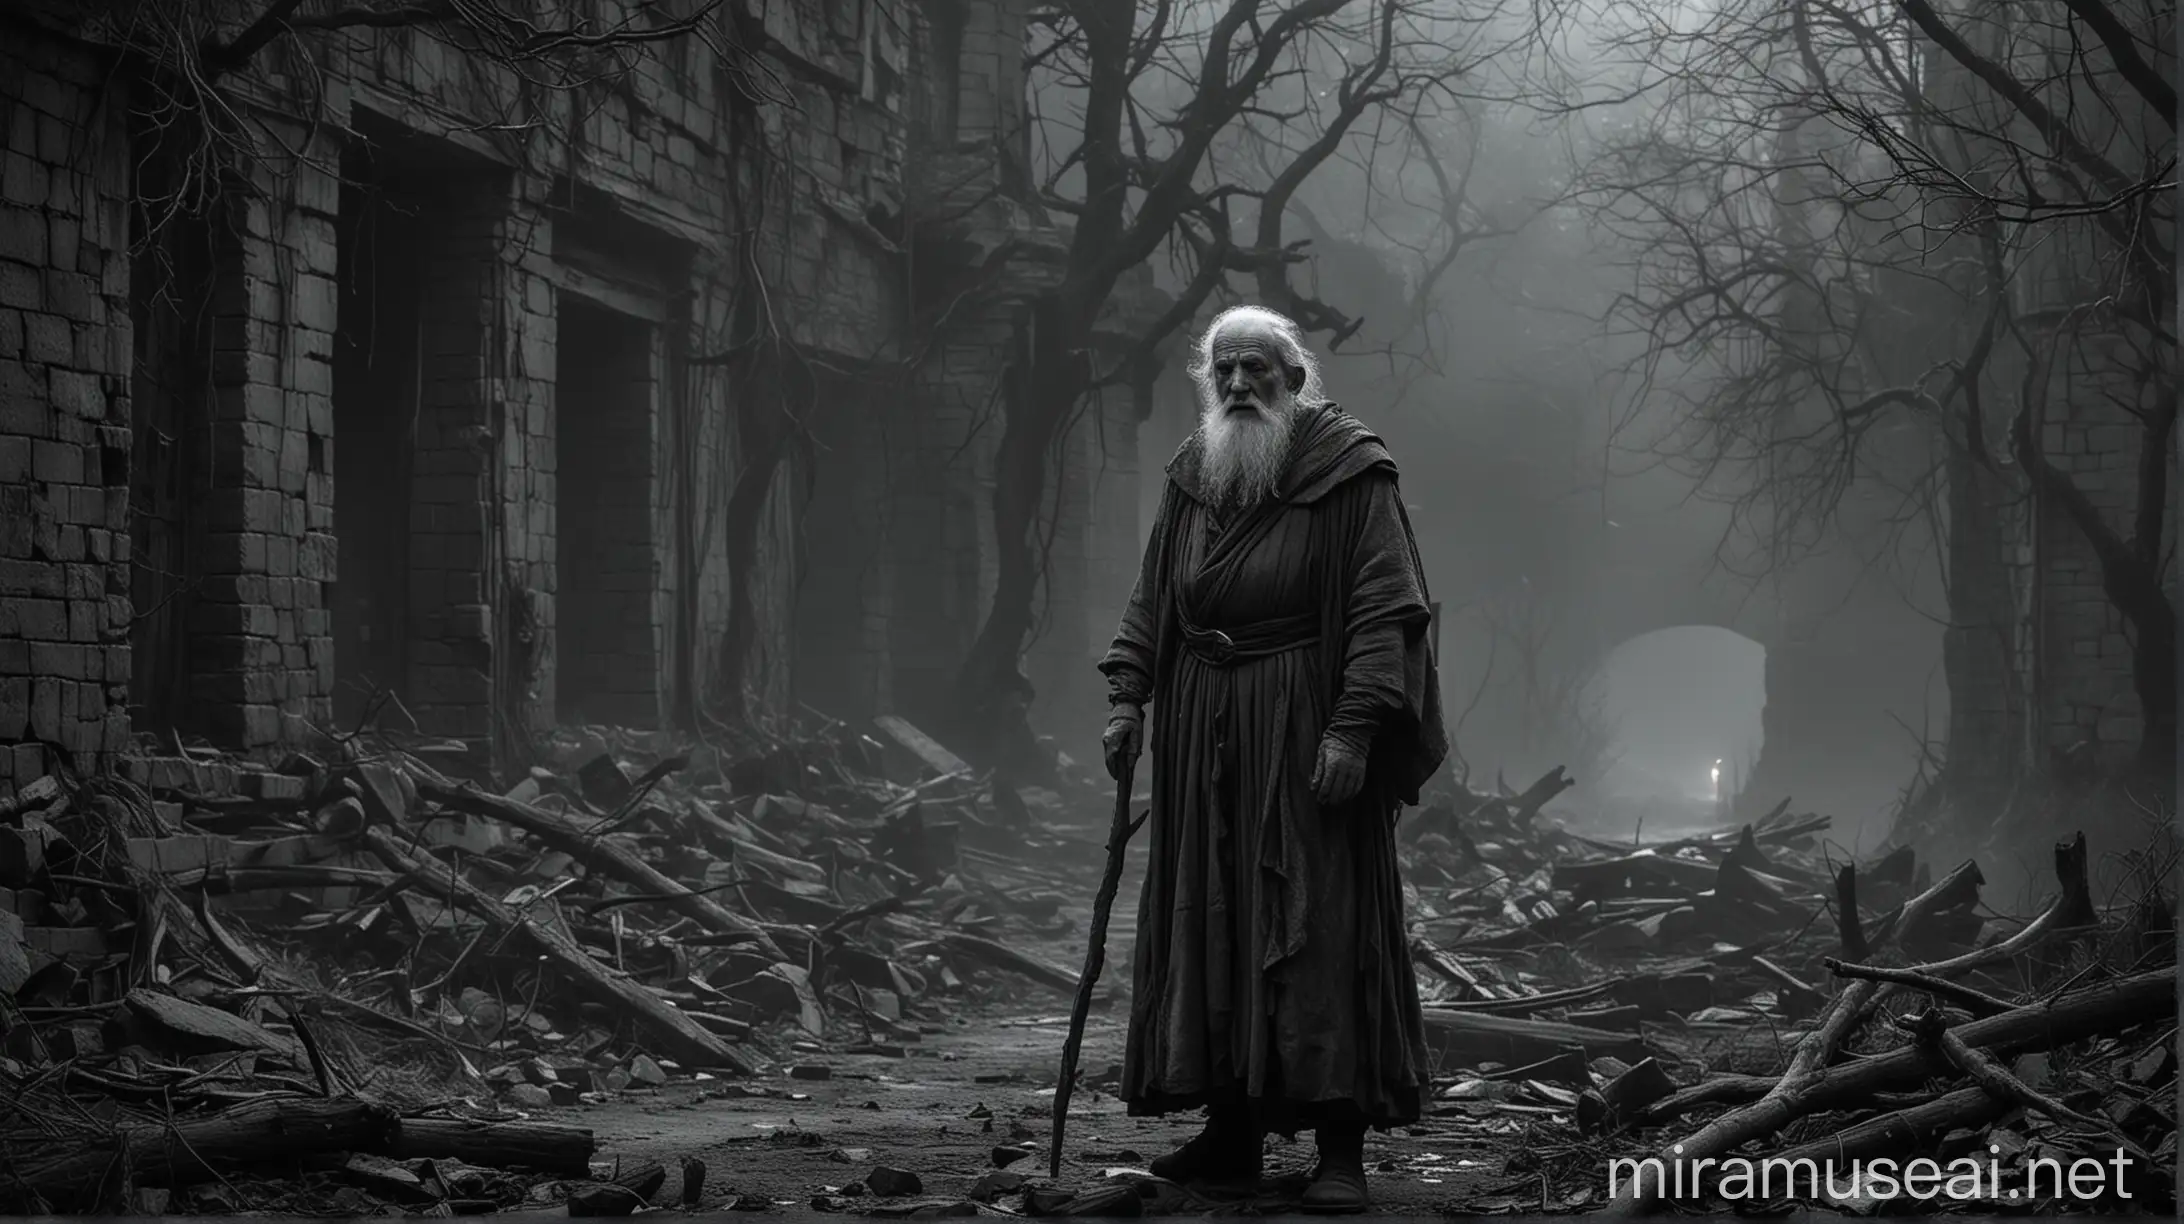 In an ancient, forgotten world where darkness and light were inseparable, there lived an old, wise man named Darkness. His voice was rough and eerie, like the whisper of wind in abandoned ruins, and those who heard it froze in fear and reverence.